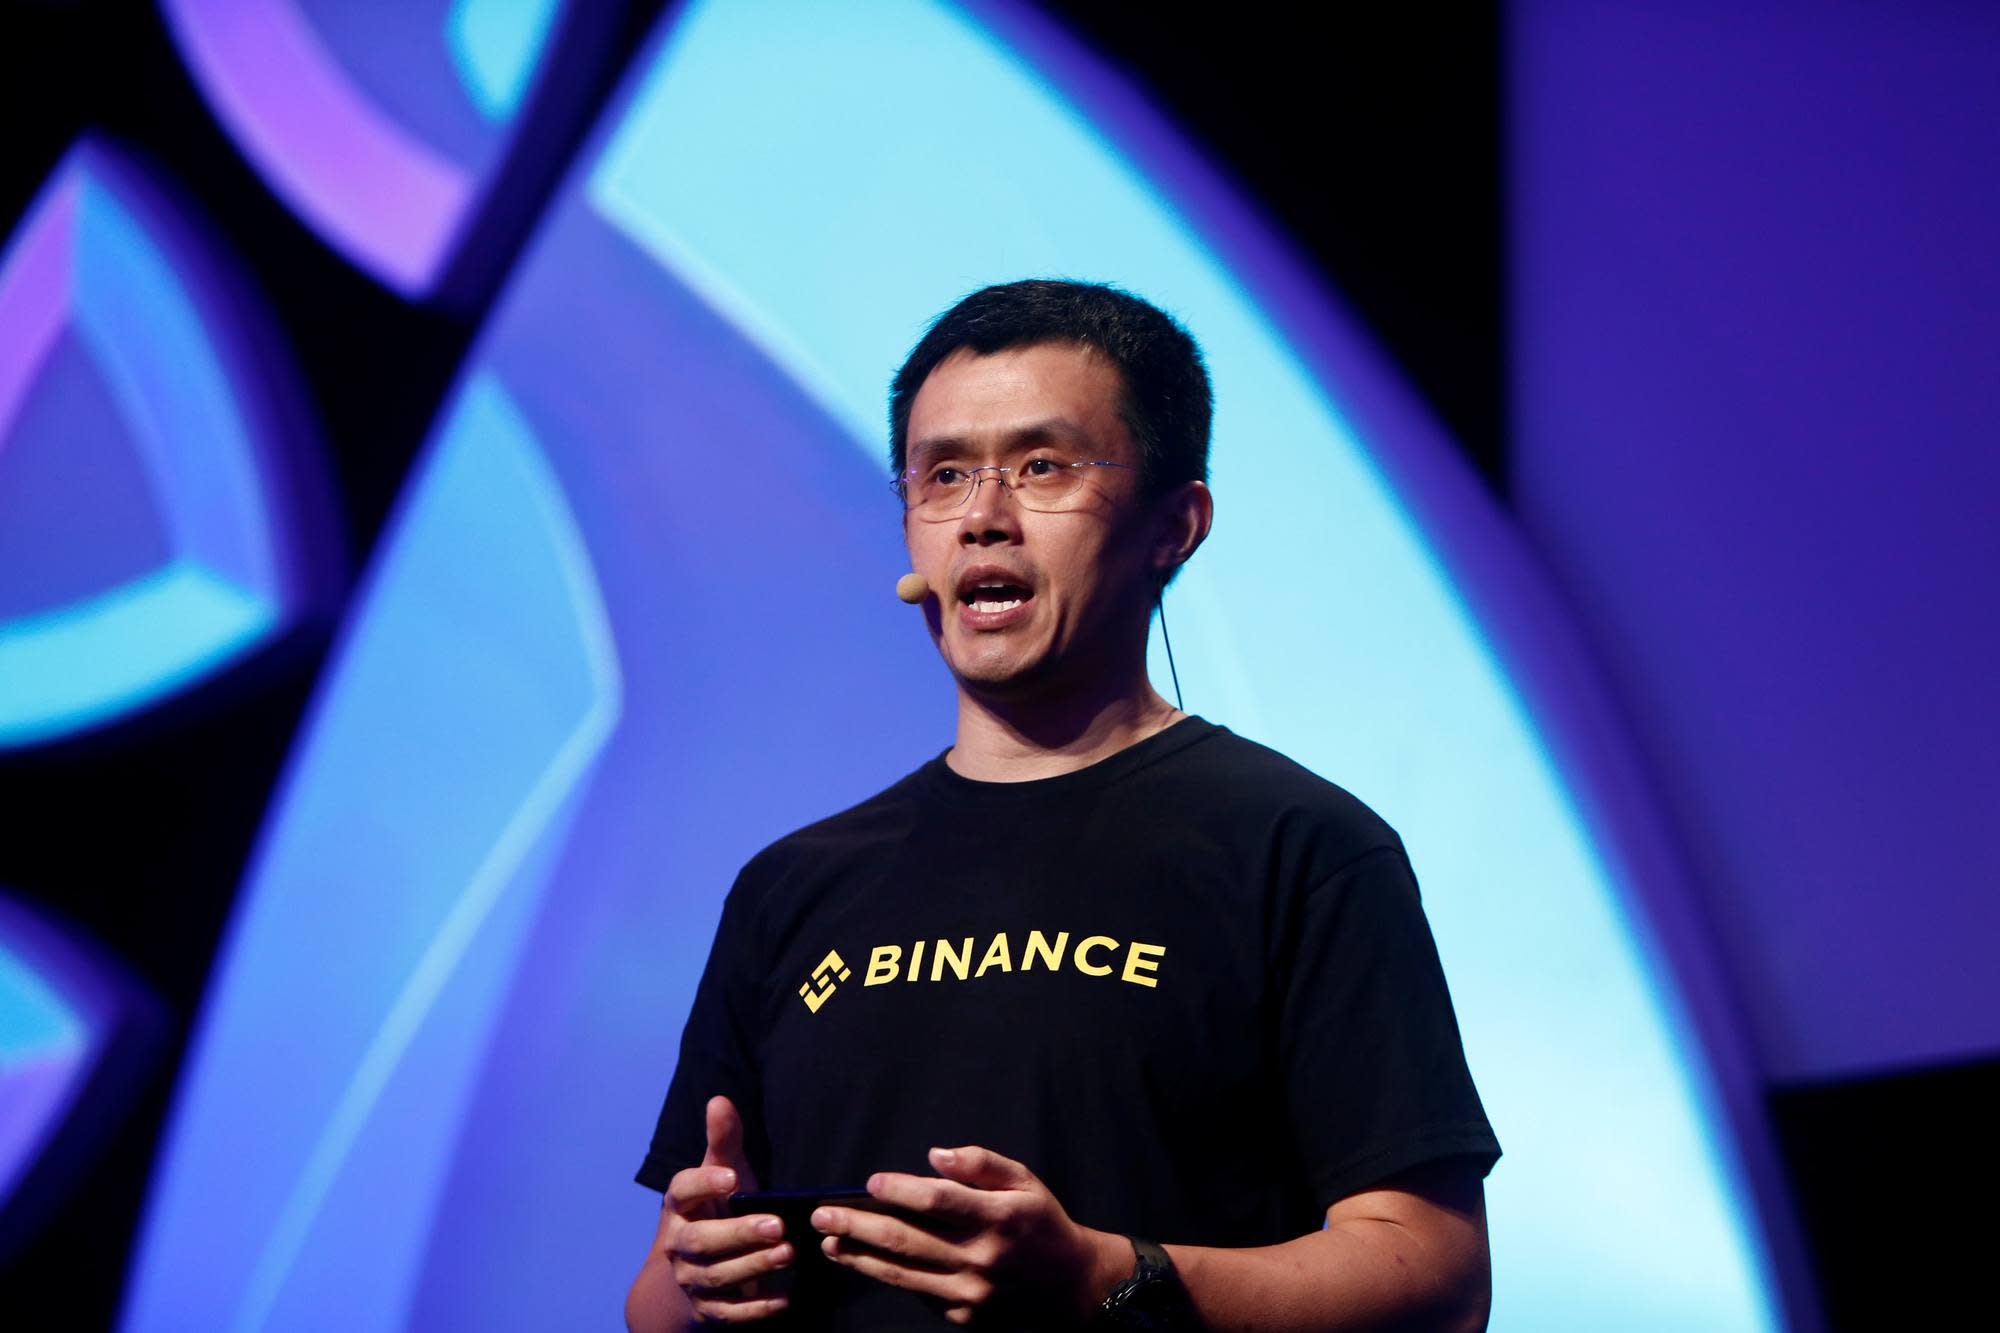 Binance CEO: Amazon Will Be Forced to Issue a [Crypto ...